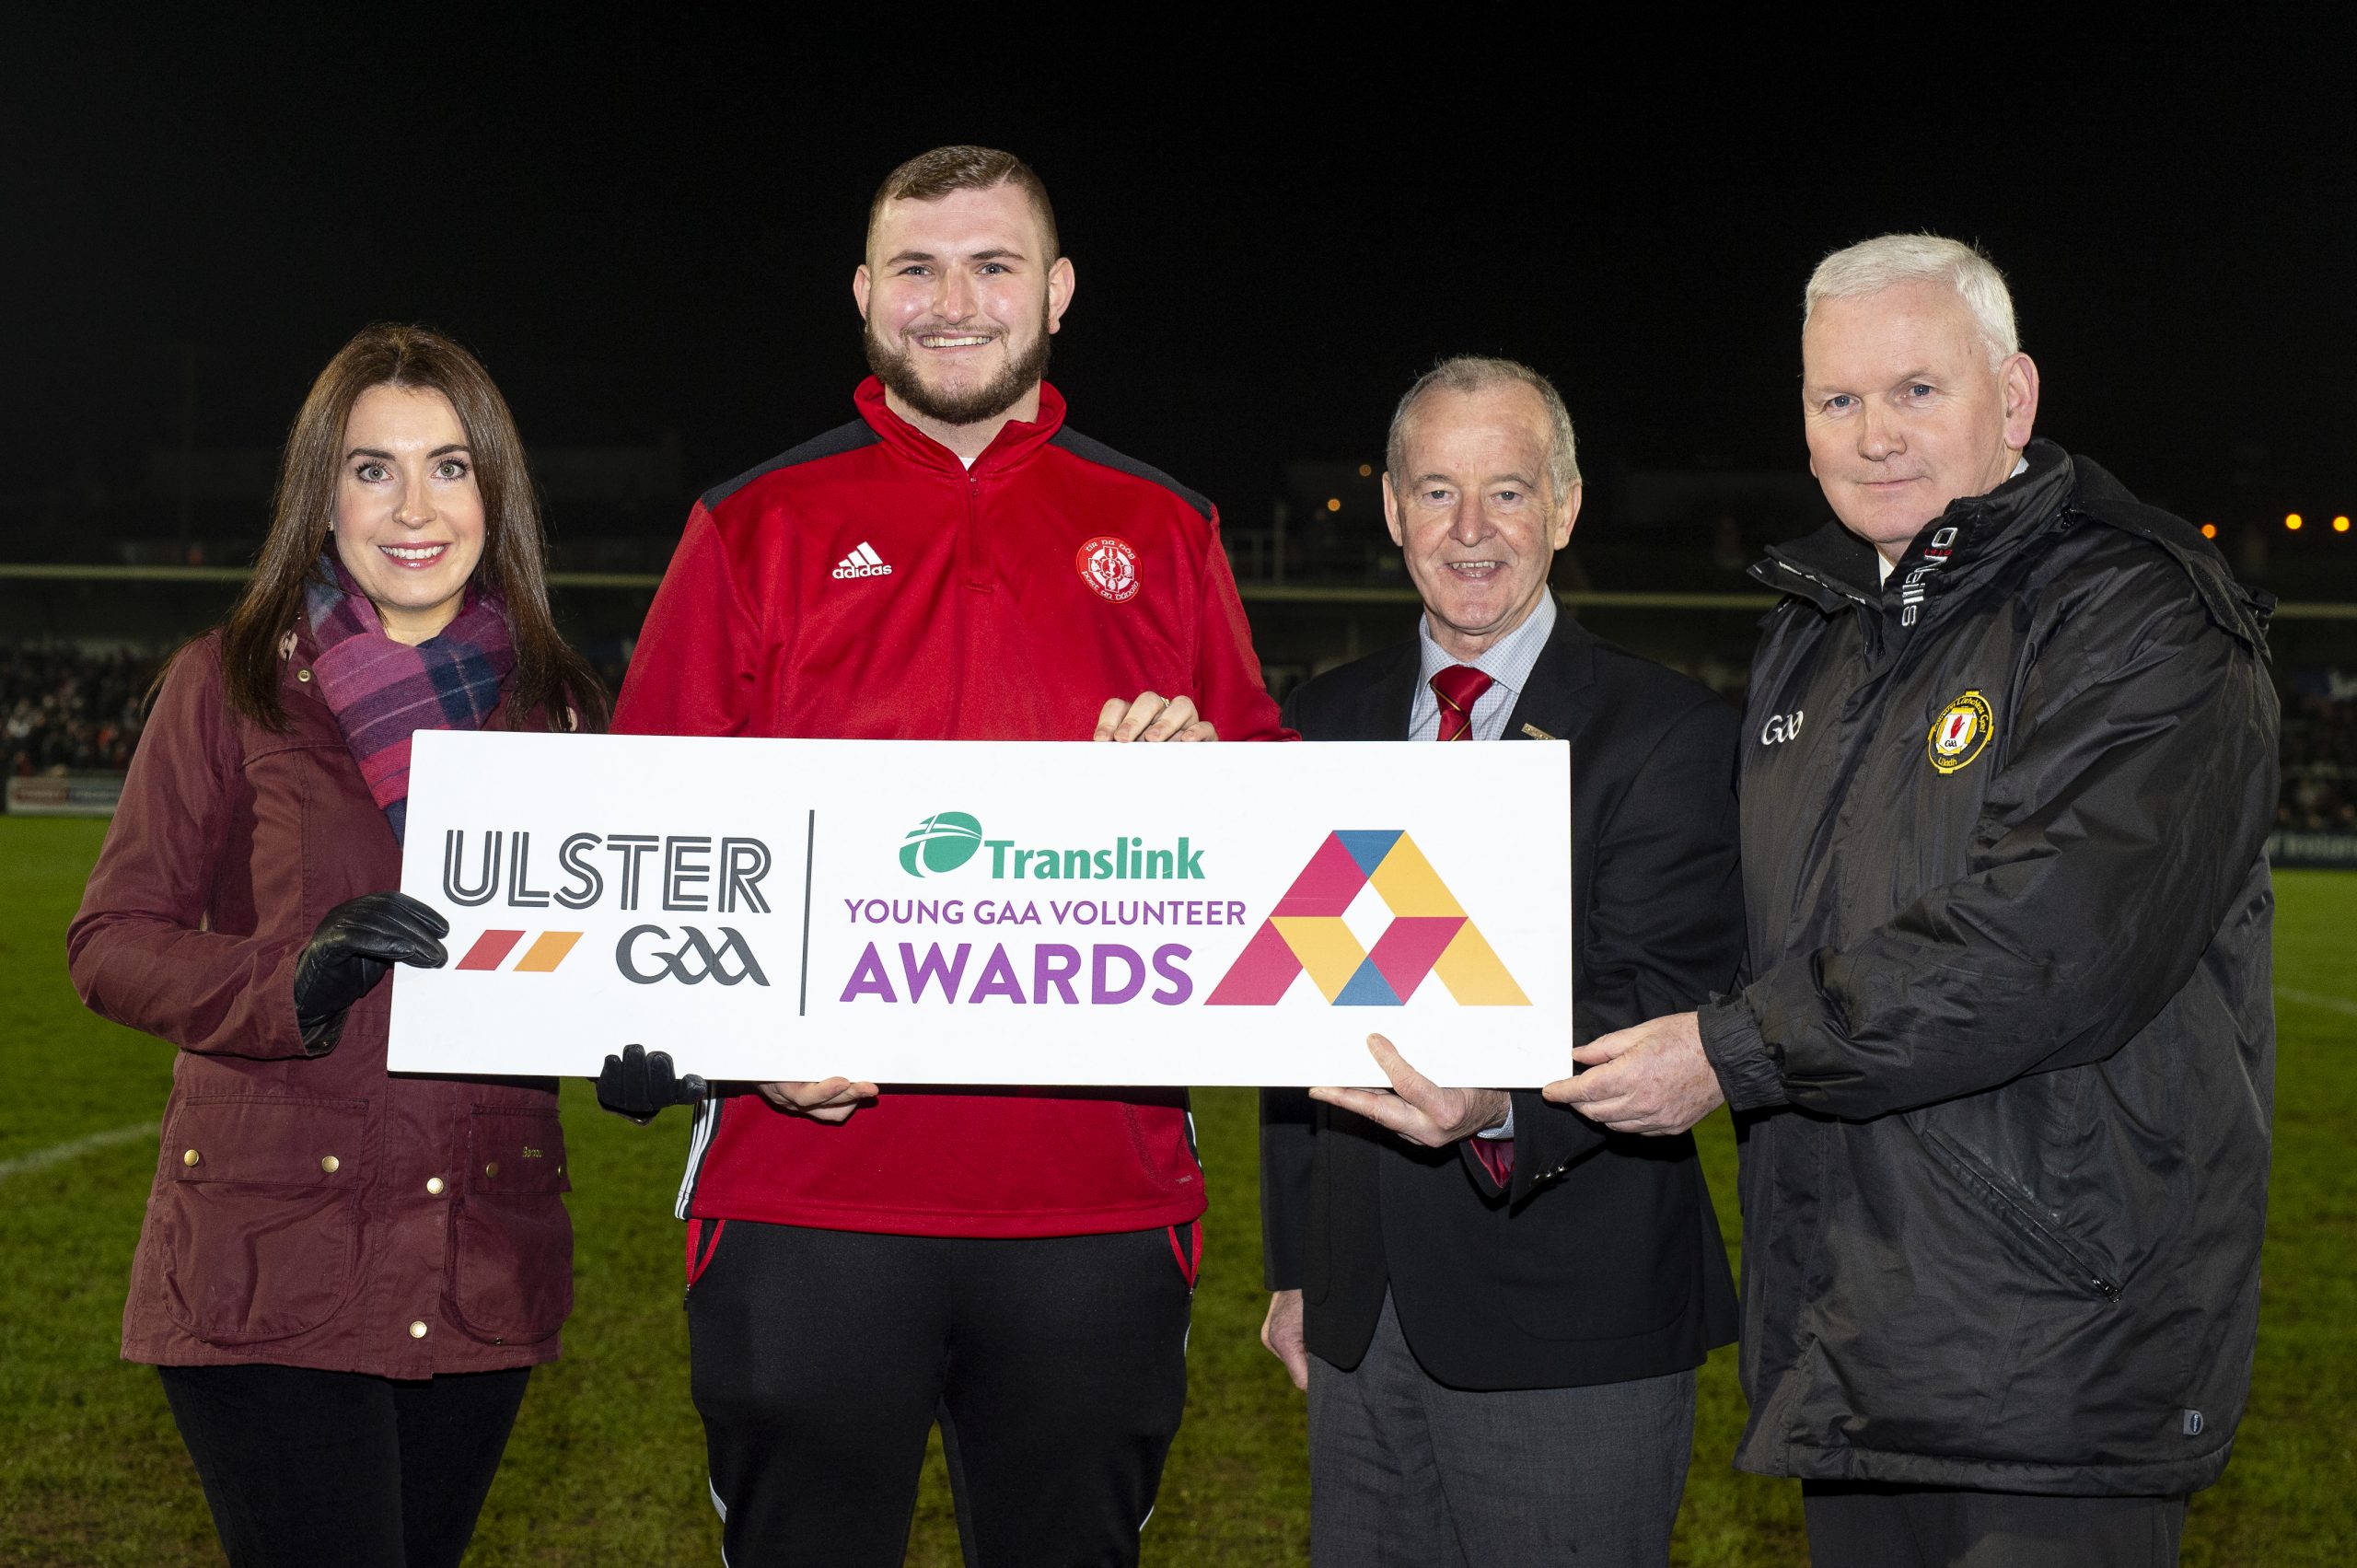 Budding reporter awarded Translink Young GAA Volunteer of the Year